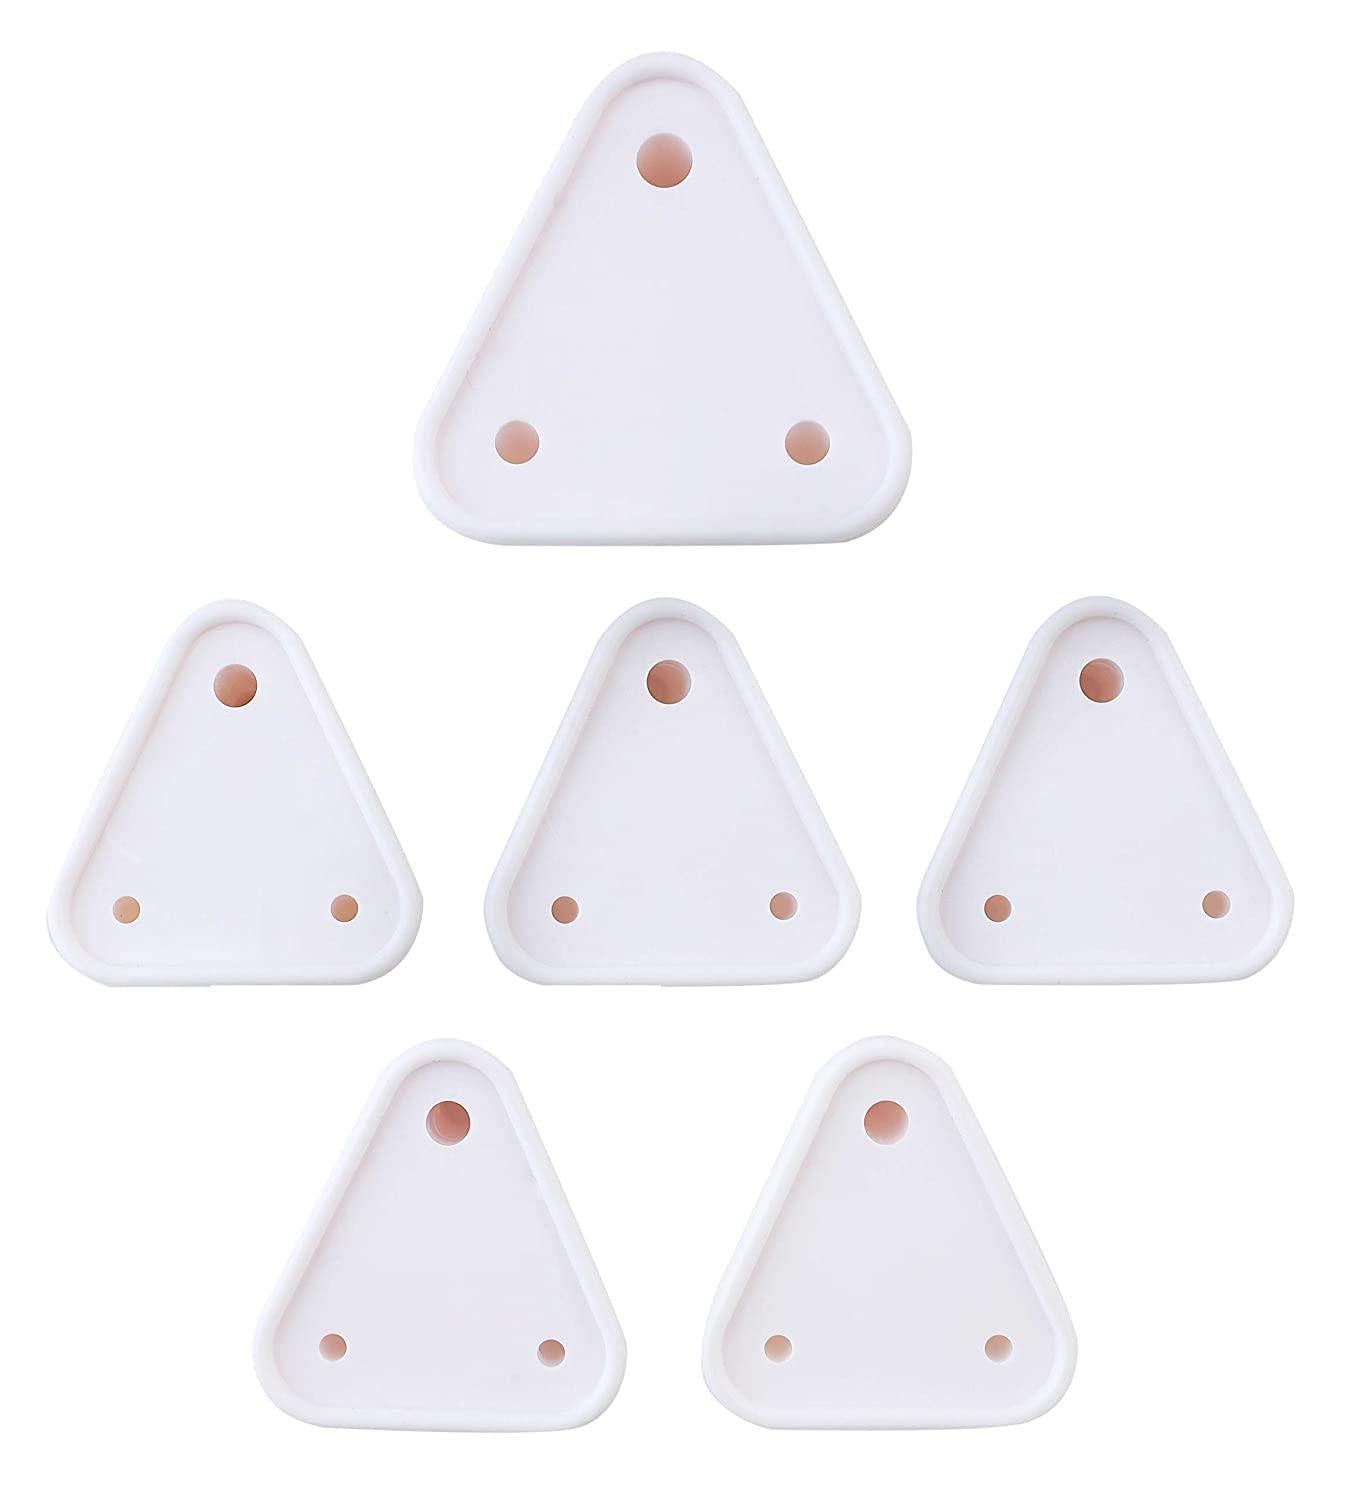 Baby Safety Electric Socket Plug Cover Guards - Pack of 6 - TruVeli